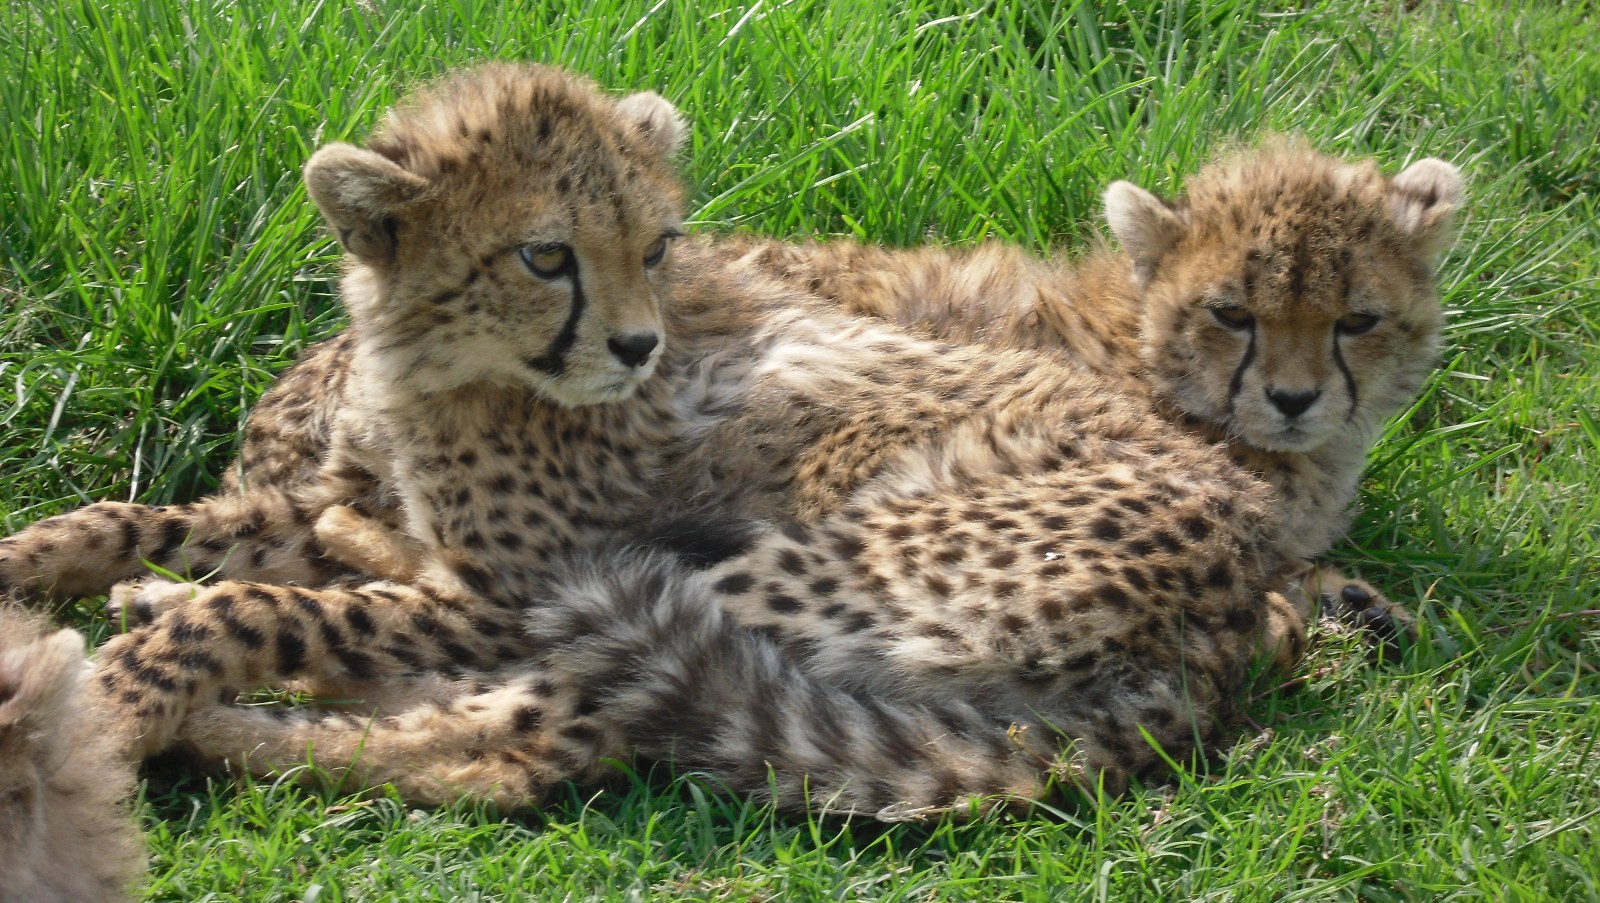 A photo of two young cheetah cubs snuggled up together in some grass